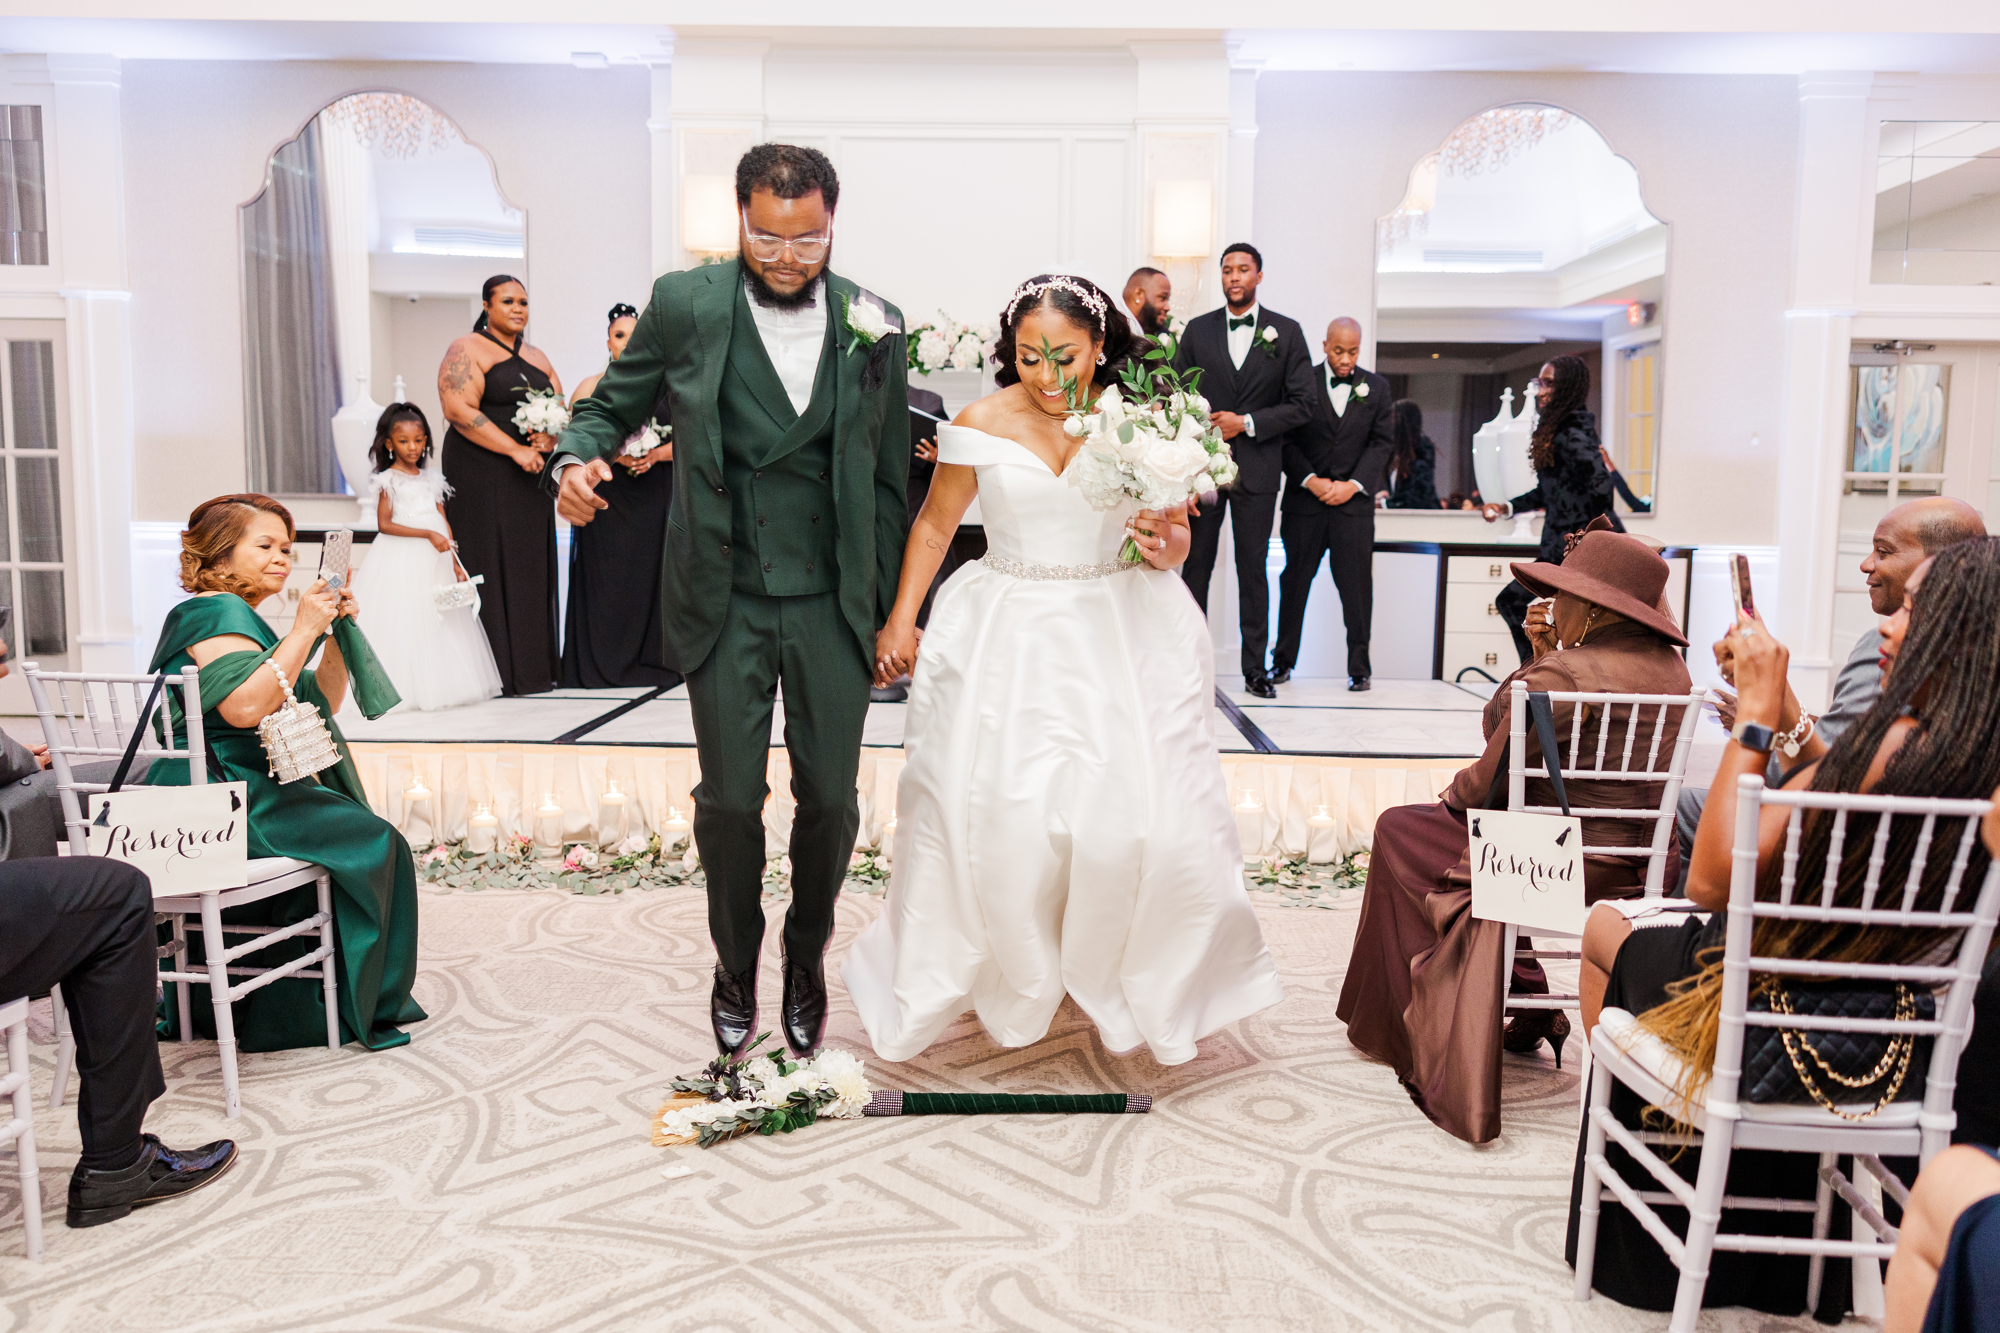 Memorable New Jersey Wedding Photos at Edgewood Country Club in Fall